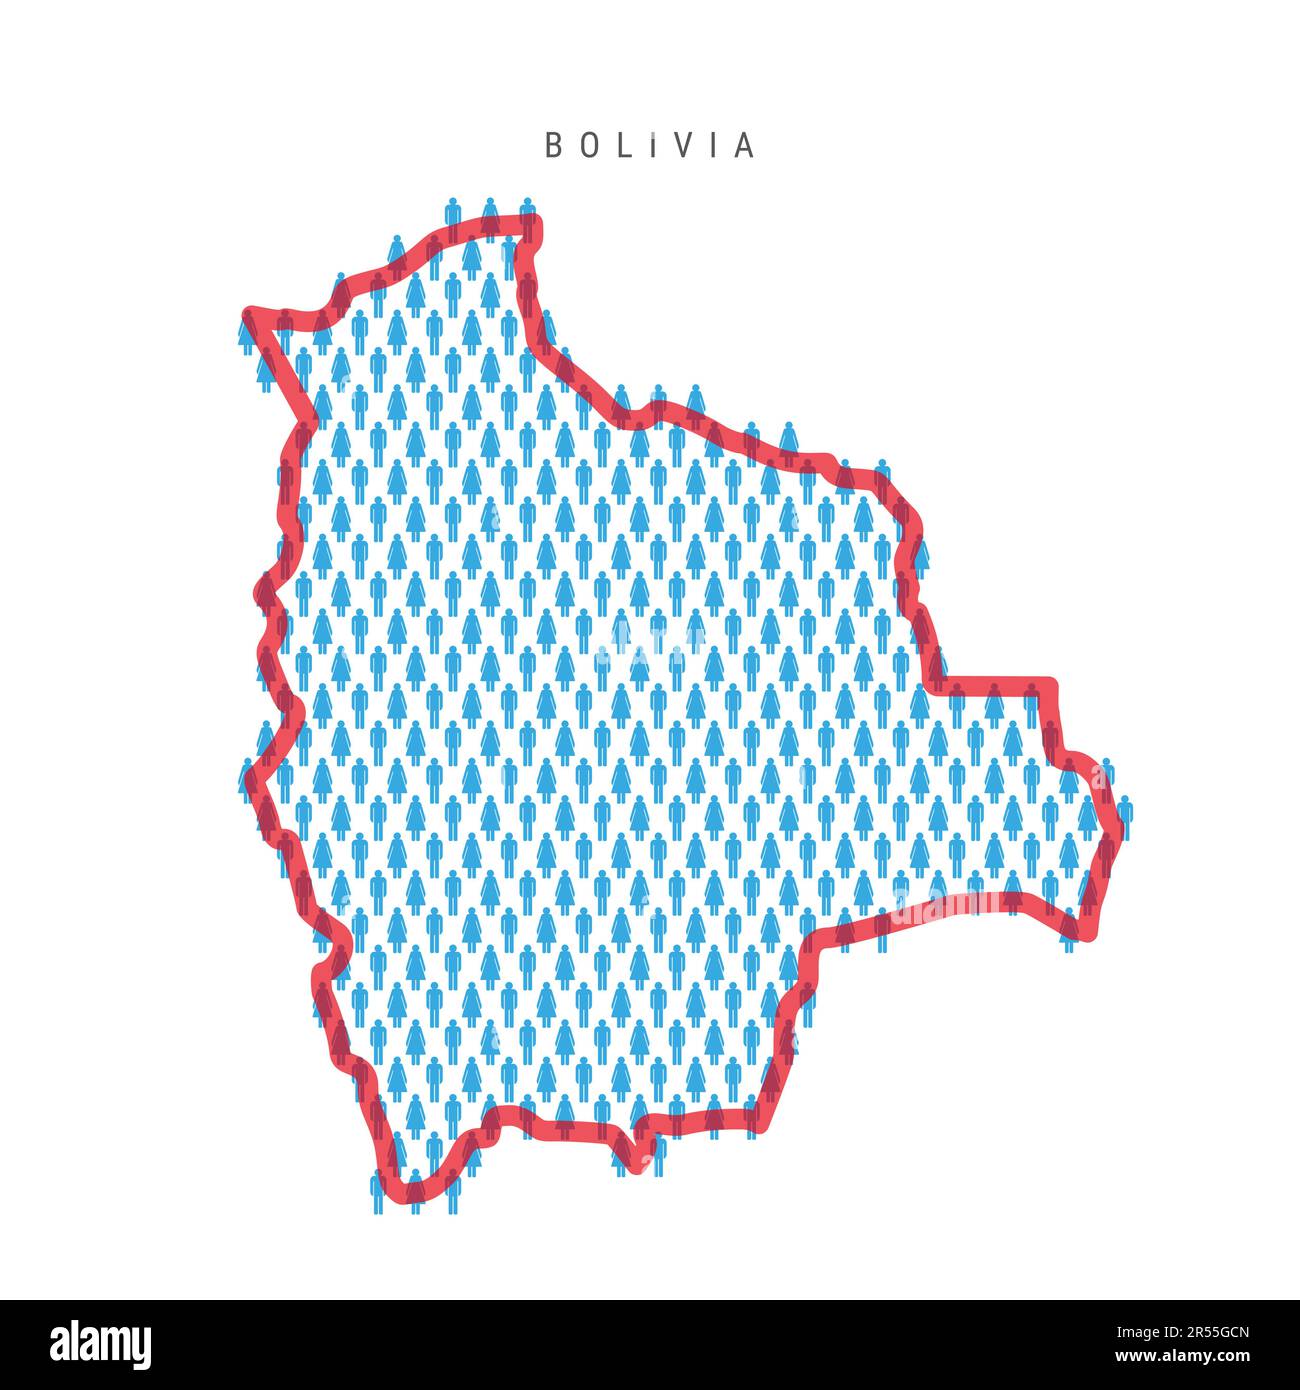 Bolivia population map. Stick figures Bolivian people map with bold red ...